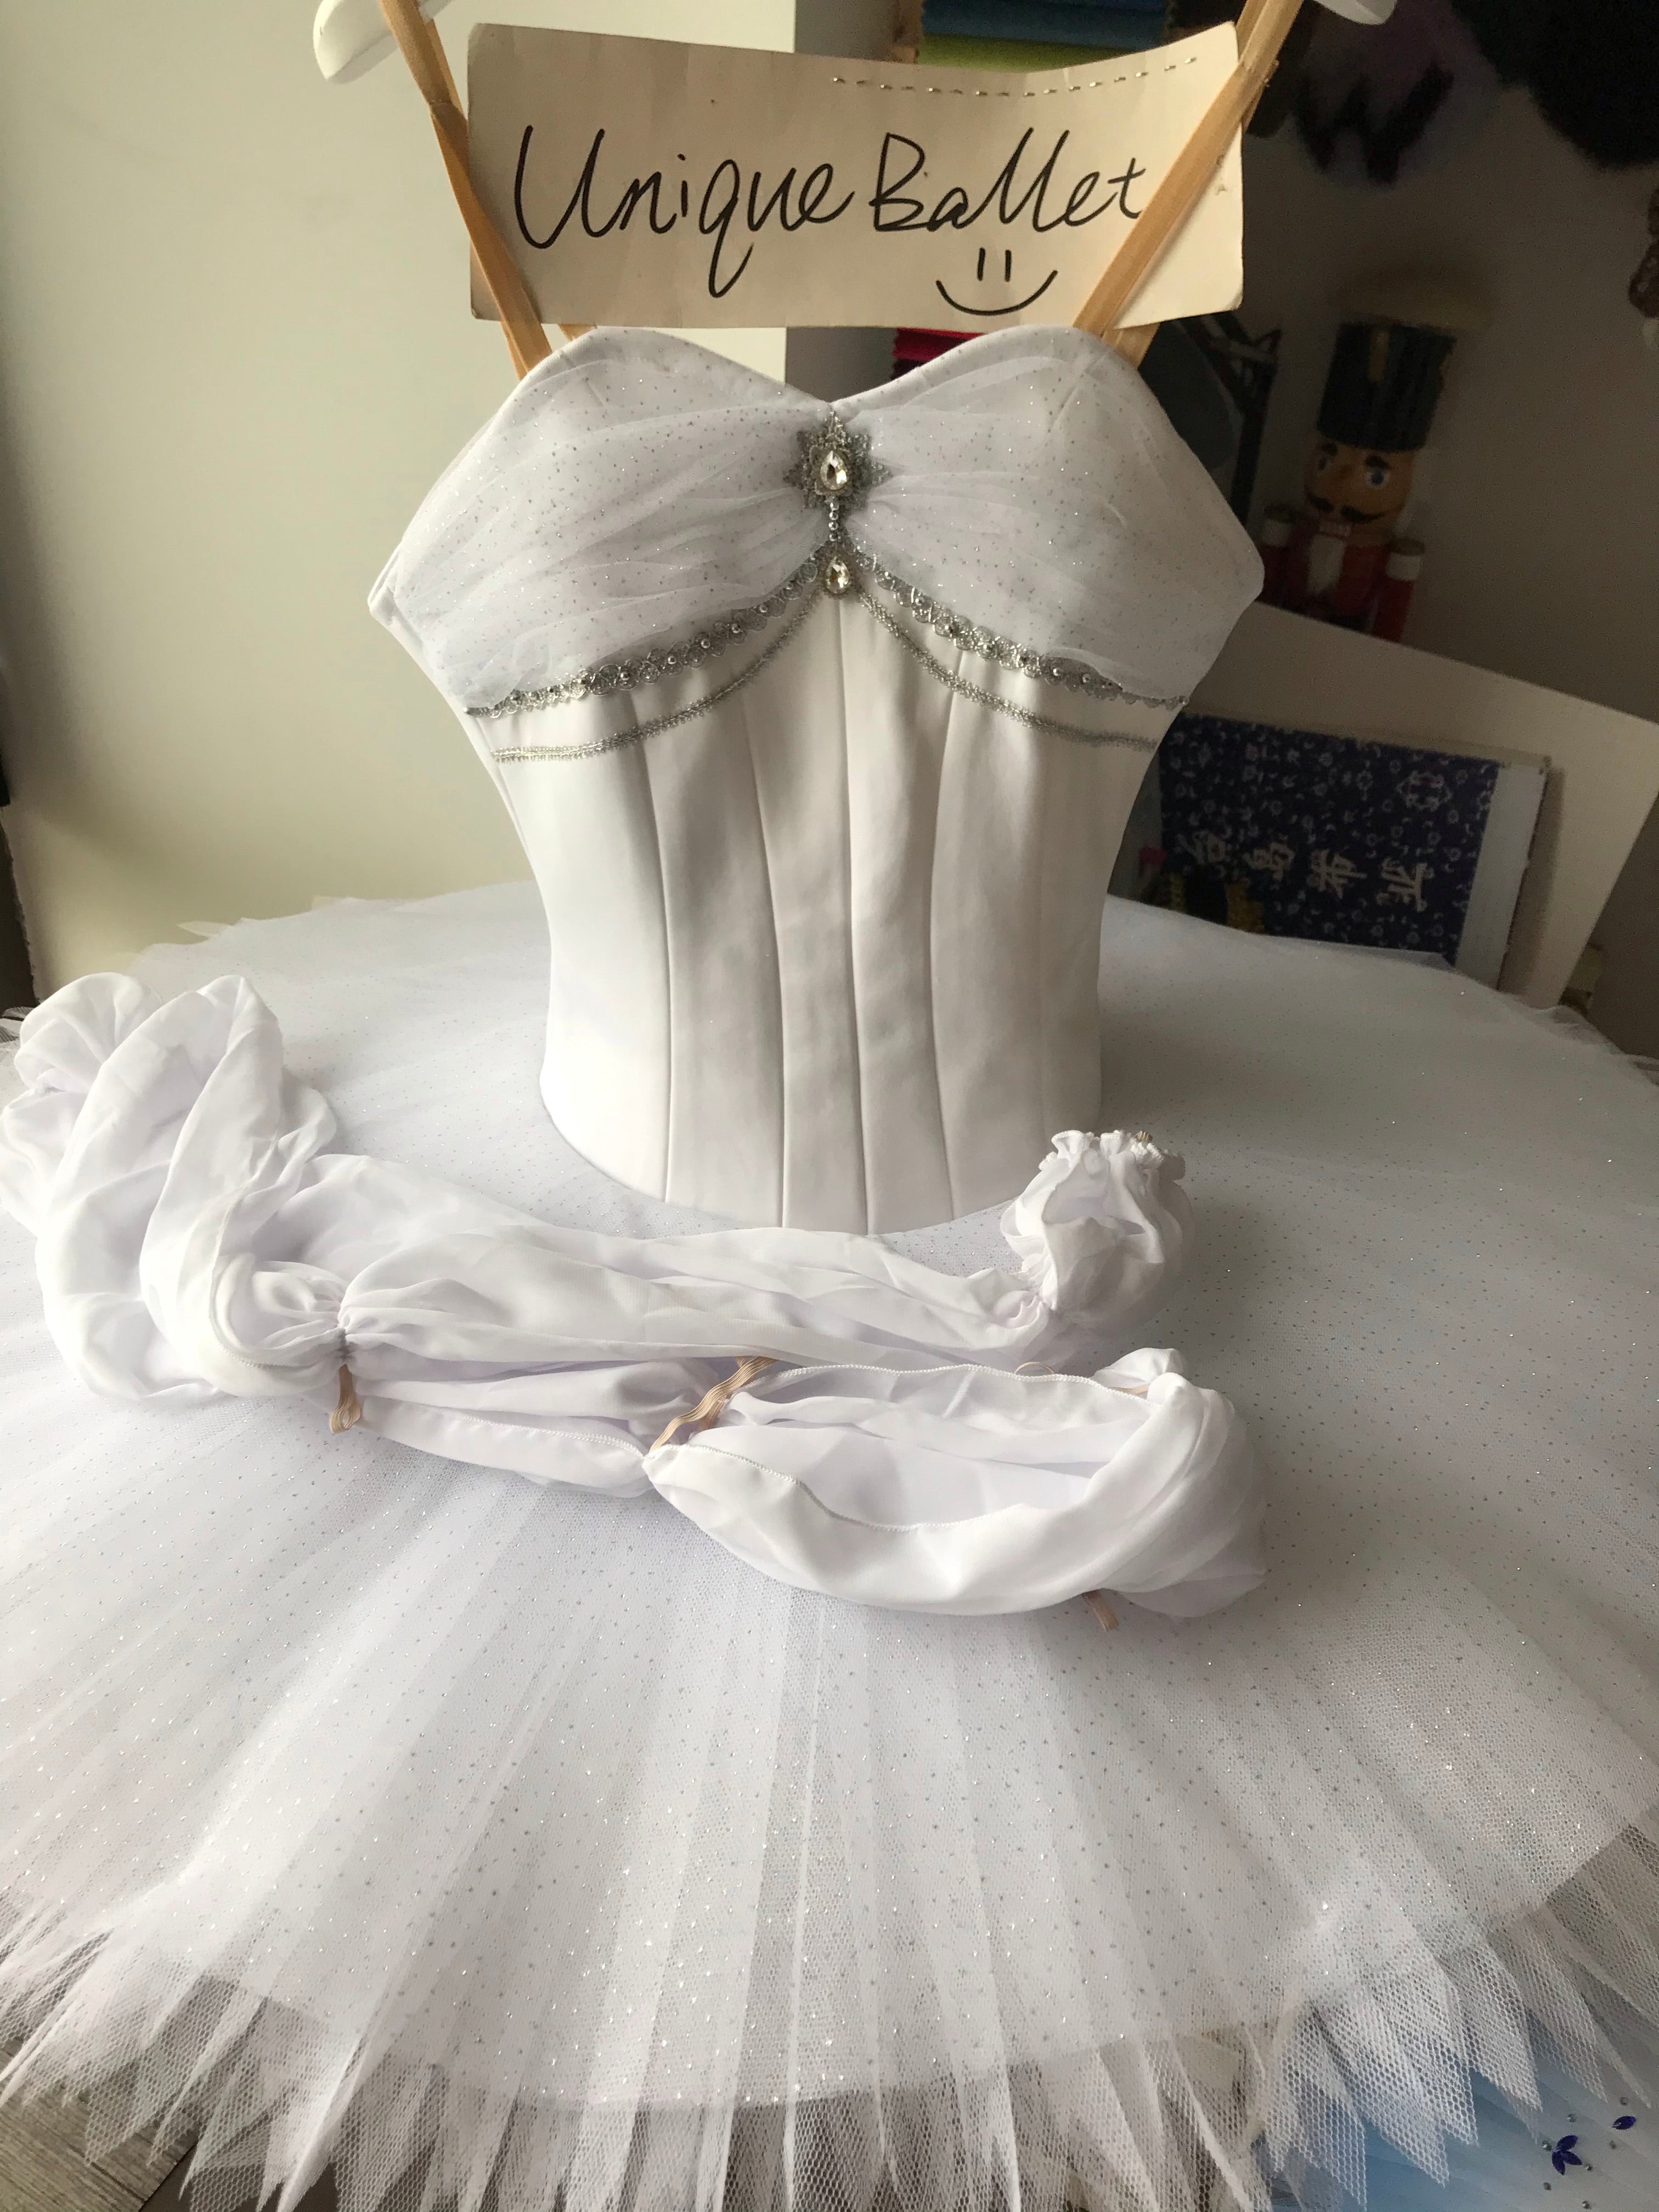 Professional White Ballet Tutu Costume For La Bayadère The Shade Classical Ballet TuTu Stage Dance Wear With Hooks